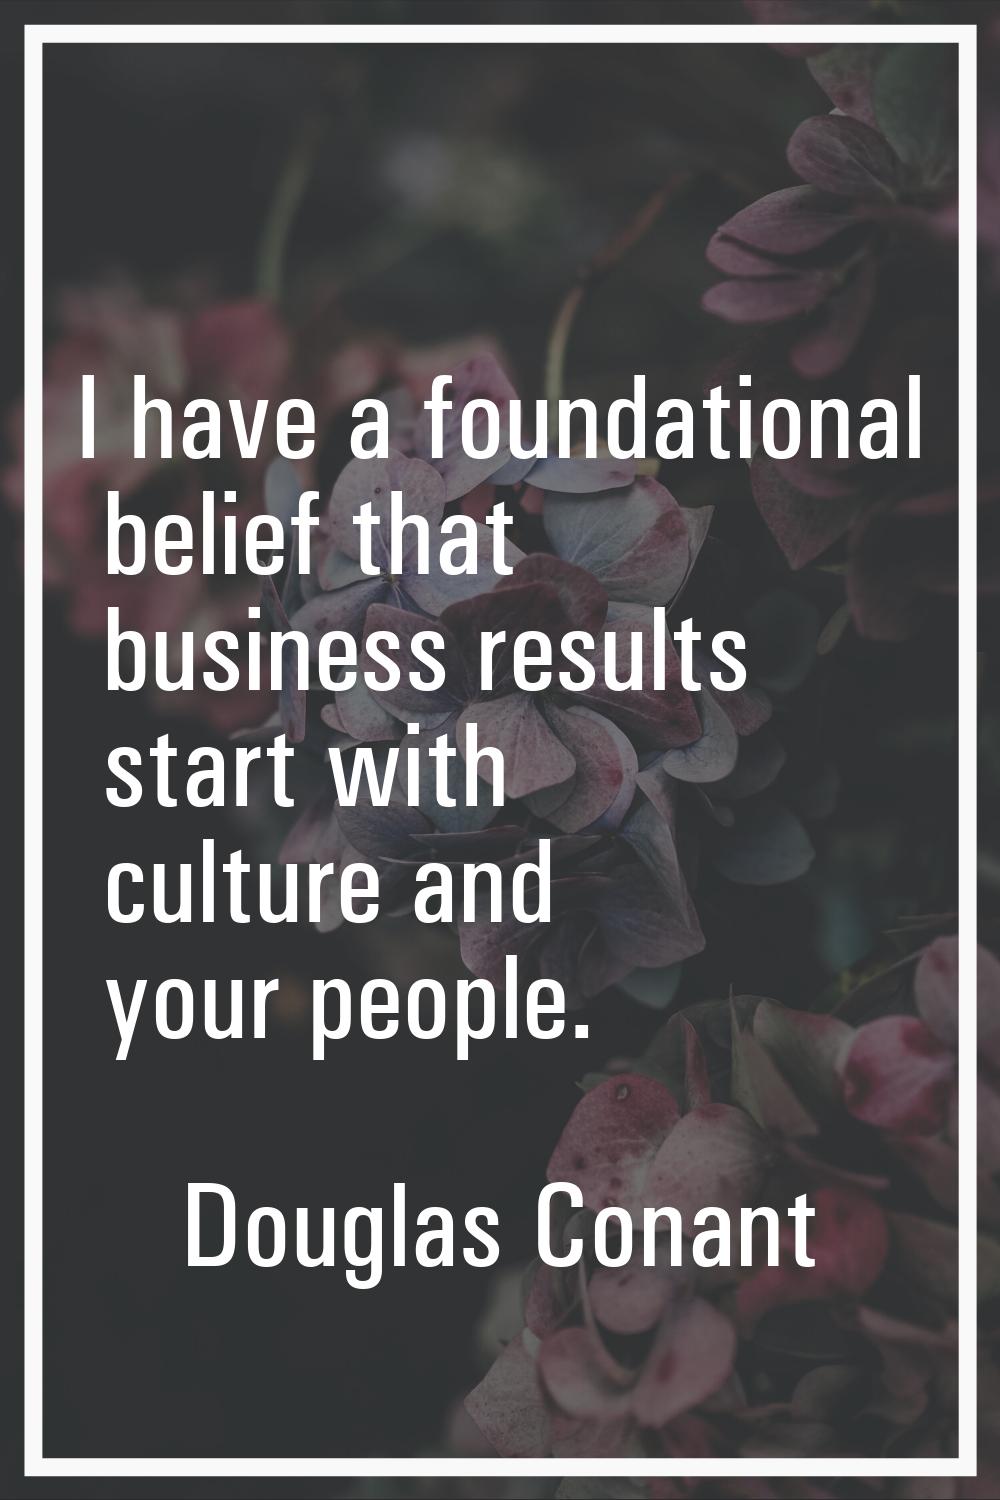 I have a foundational belief that business results start with culture and your people.